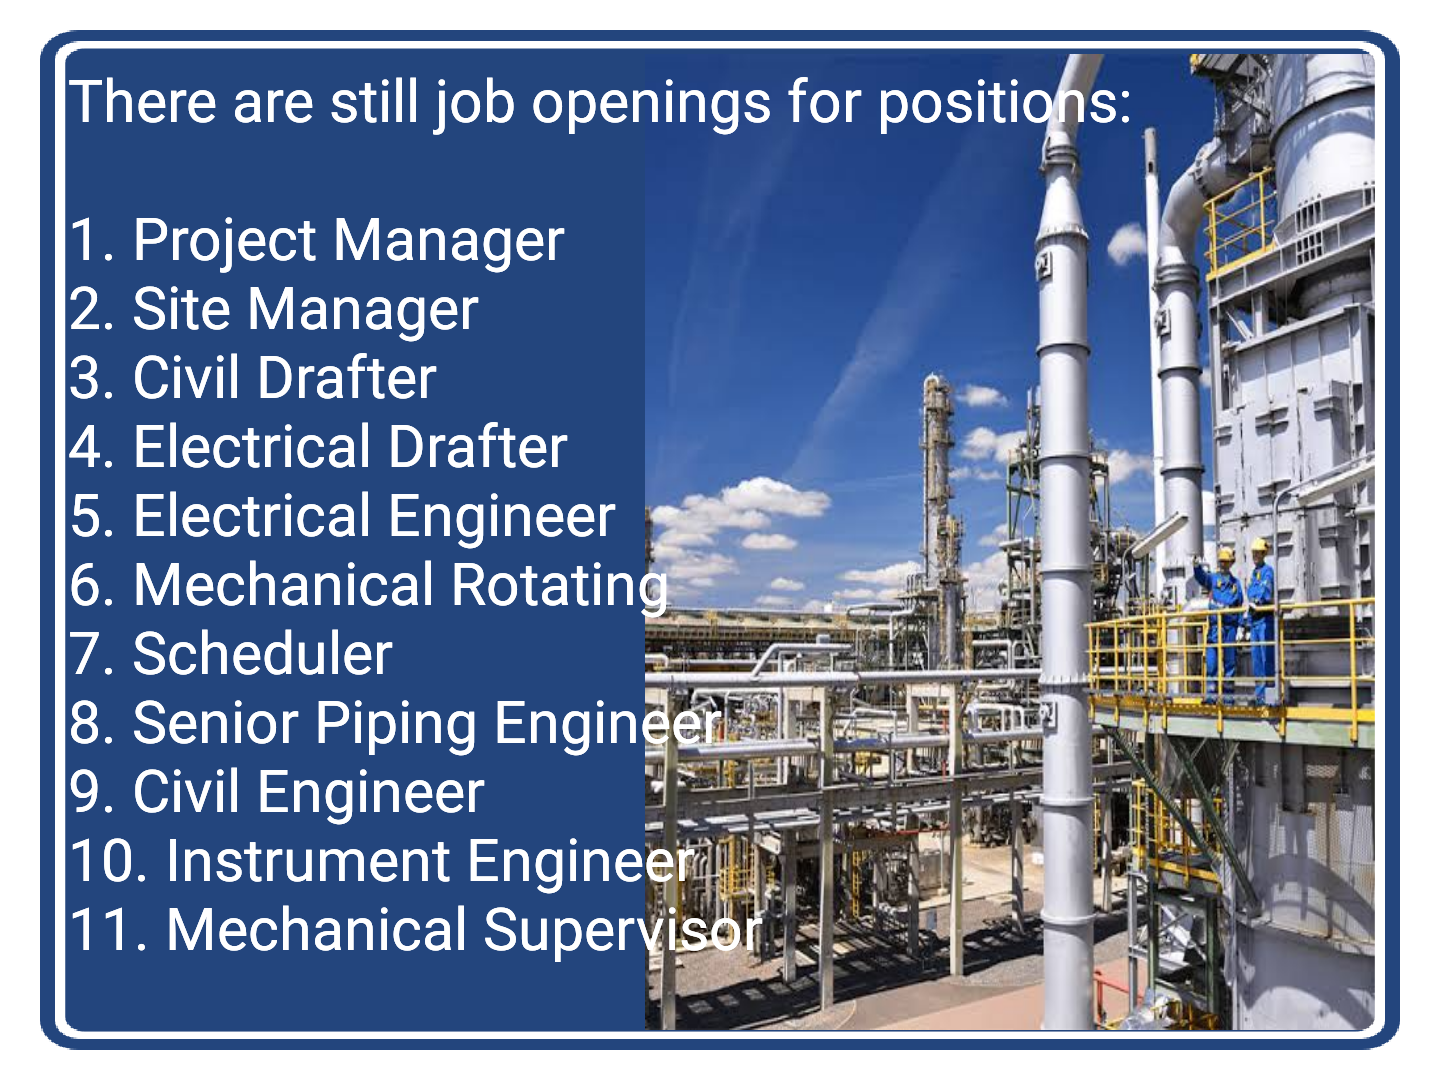 Electrical, Mechanical, Instrument, Civil, & Piping Engineer Jobs